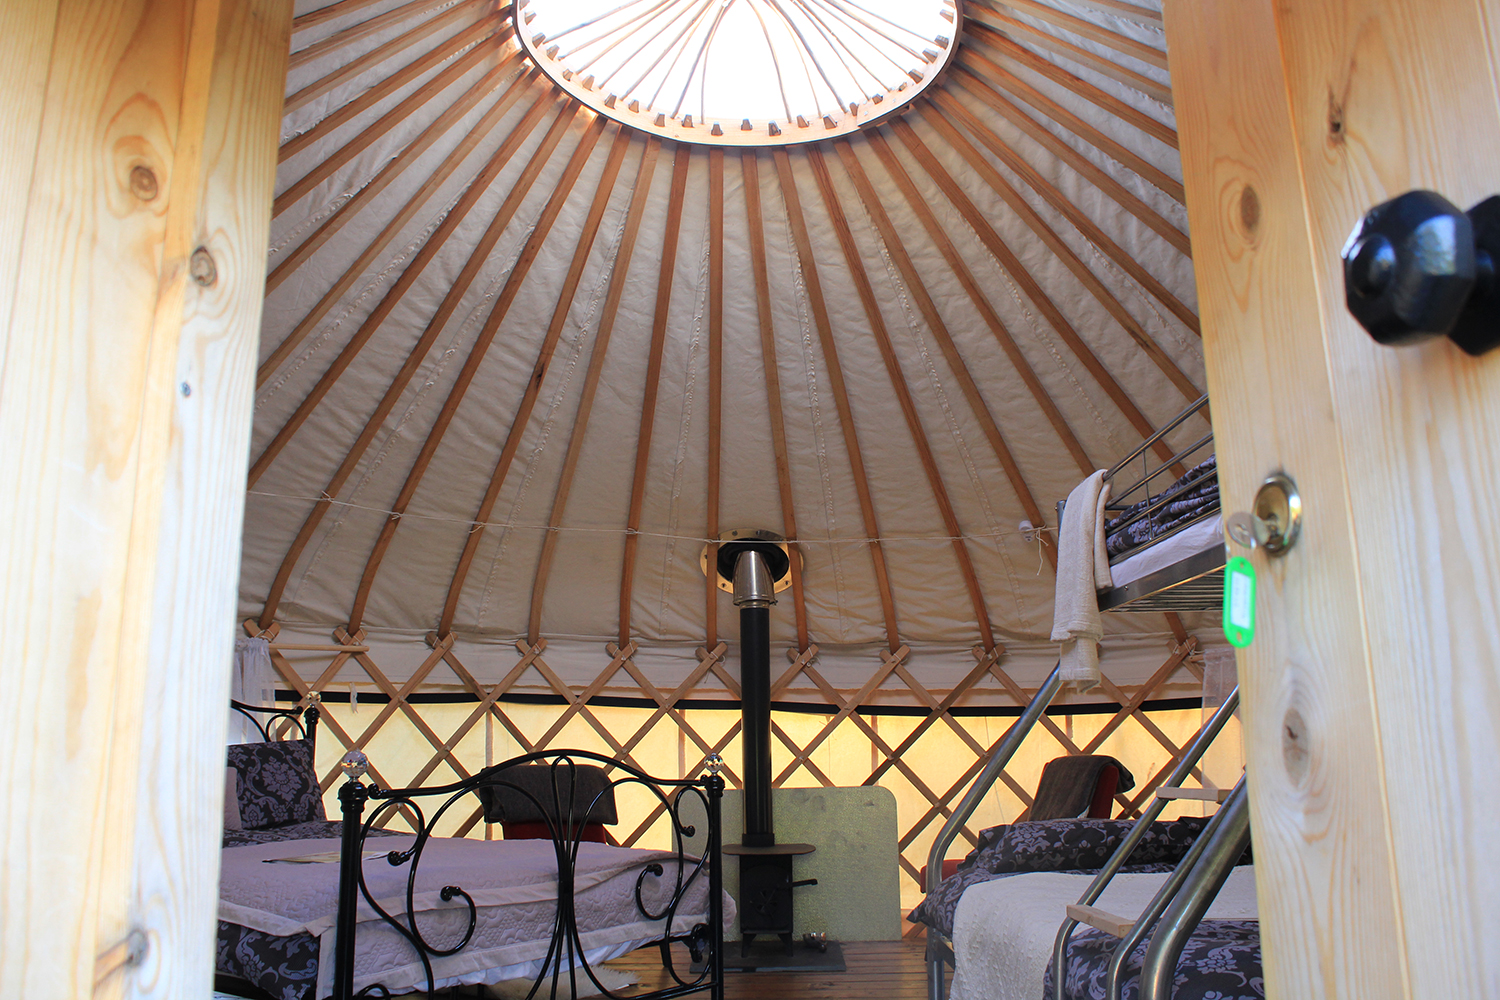 Outside looking into the Red Kite yurt